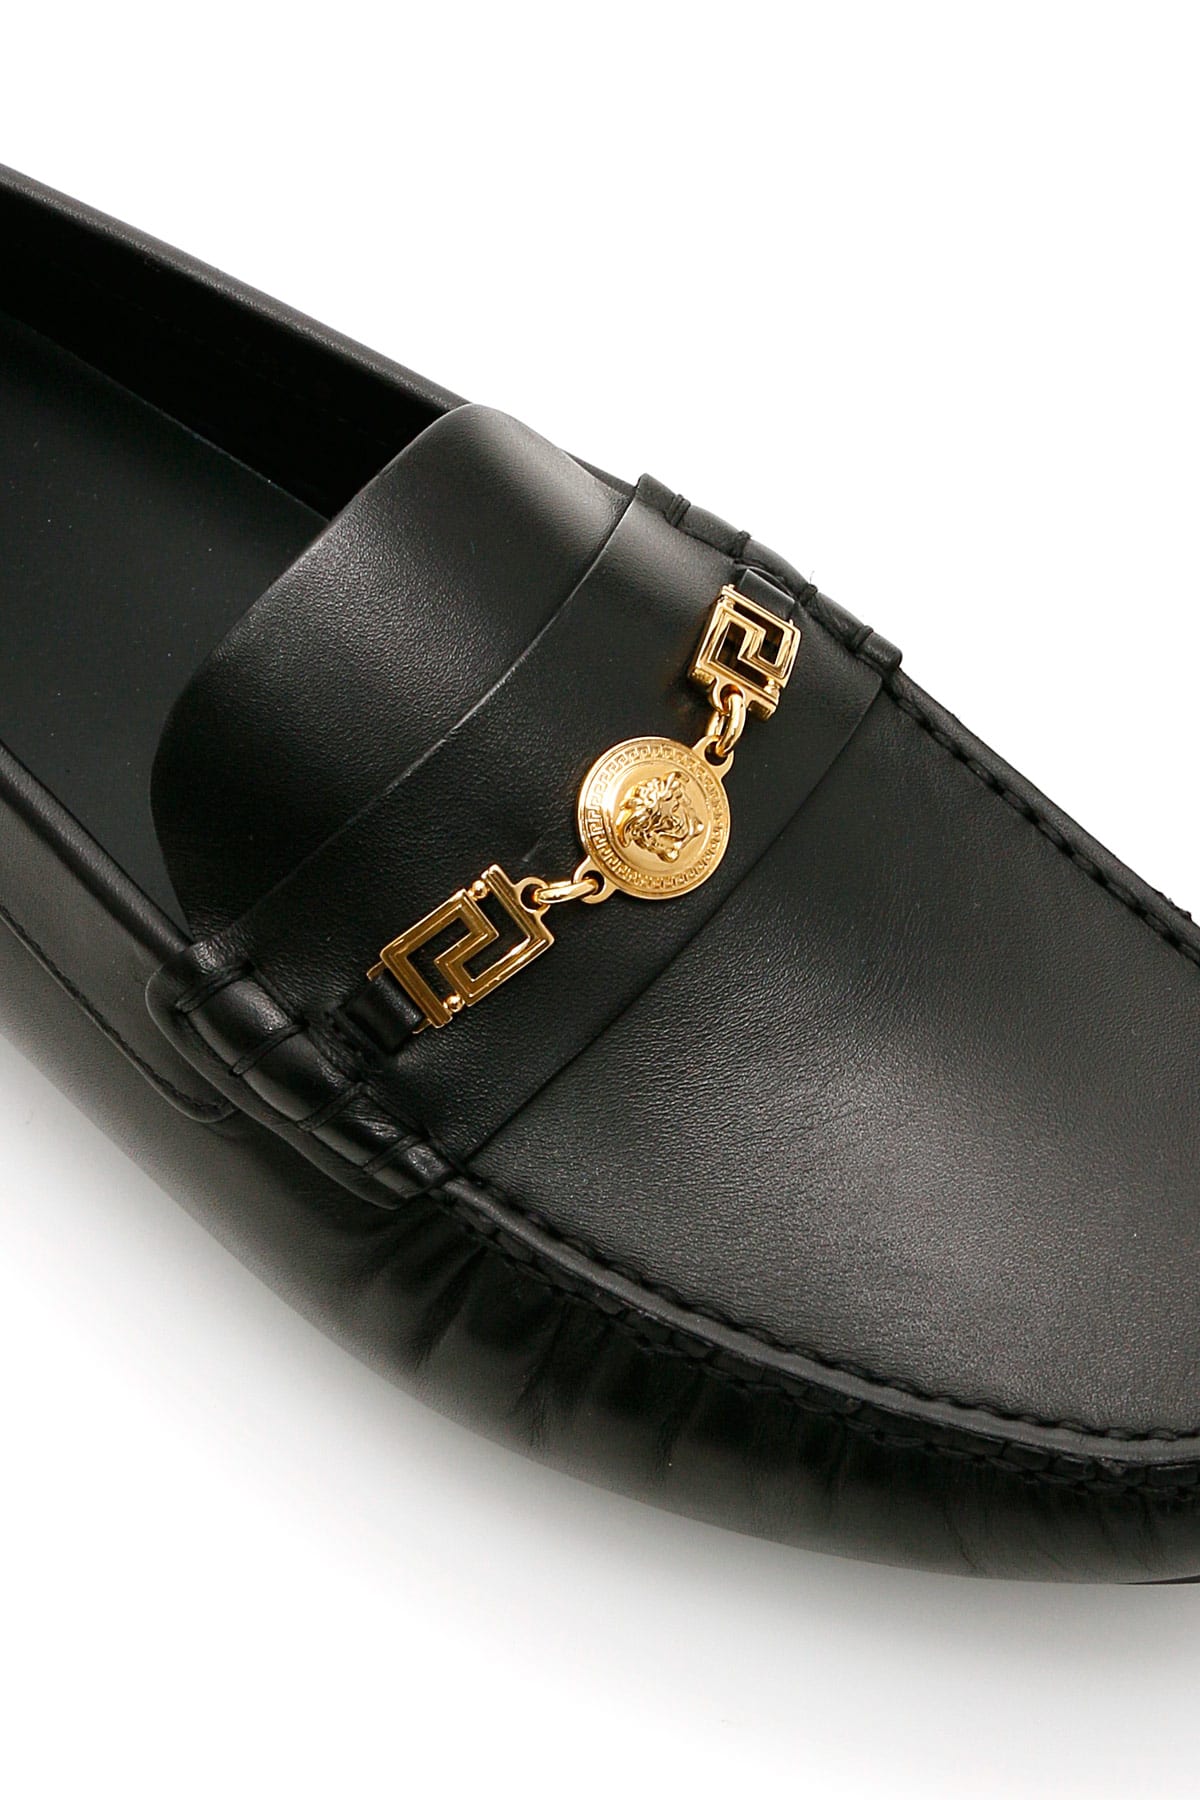 black and gold versace loafers